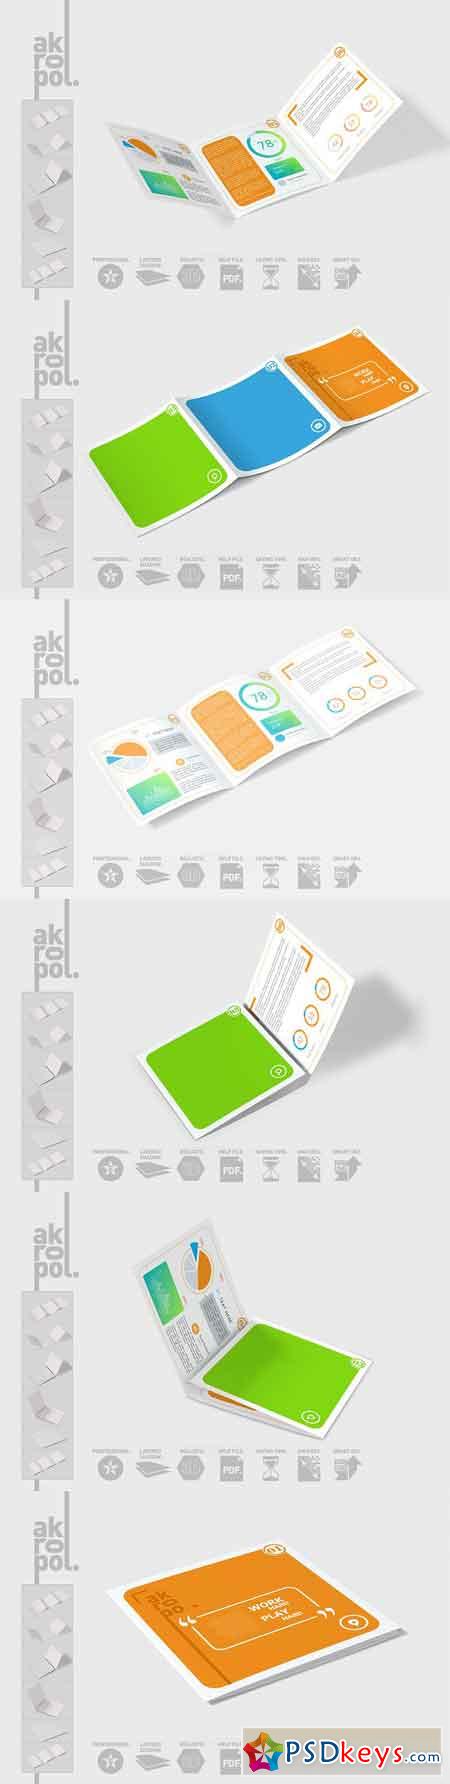 Square Trifold Brochure Mock-up 3054995